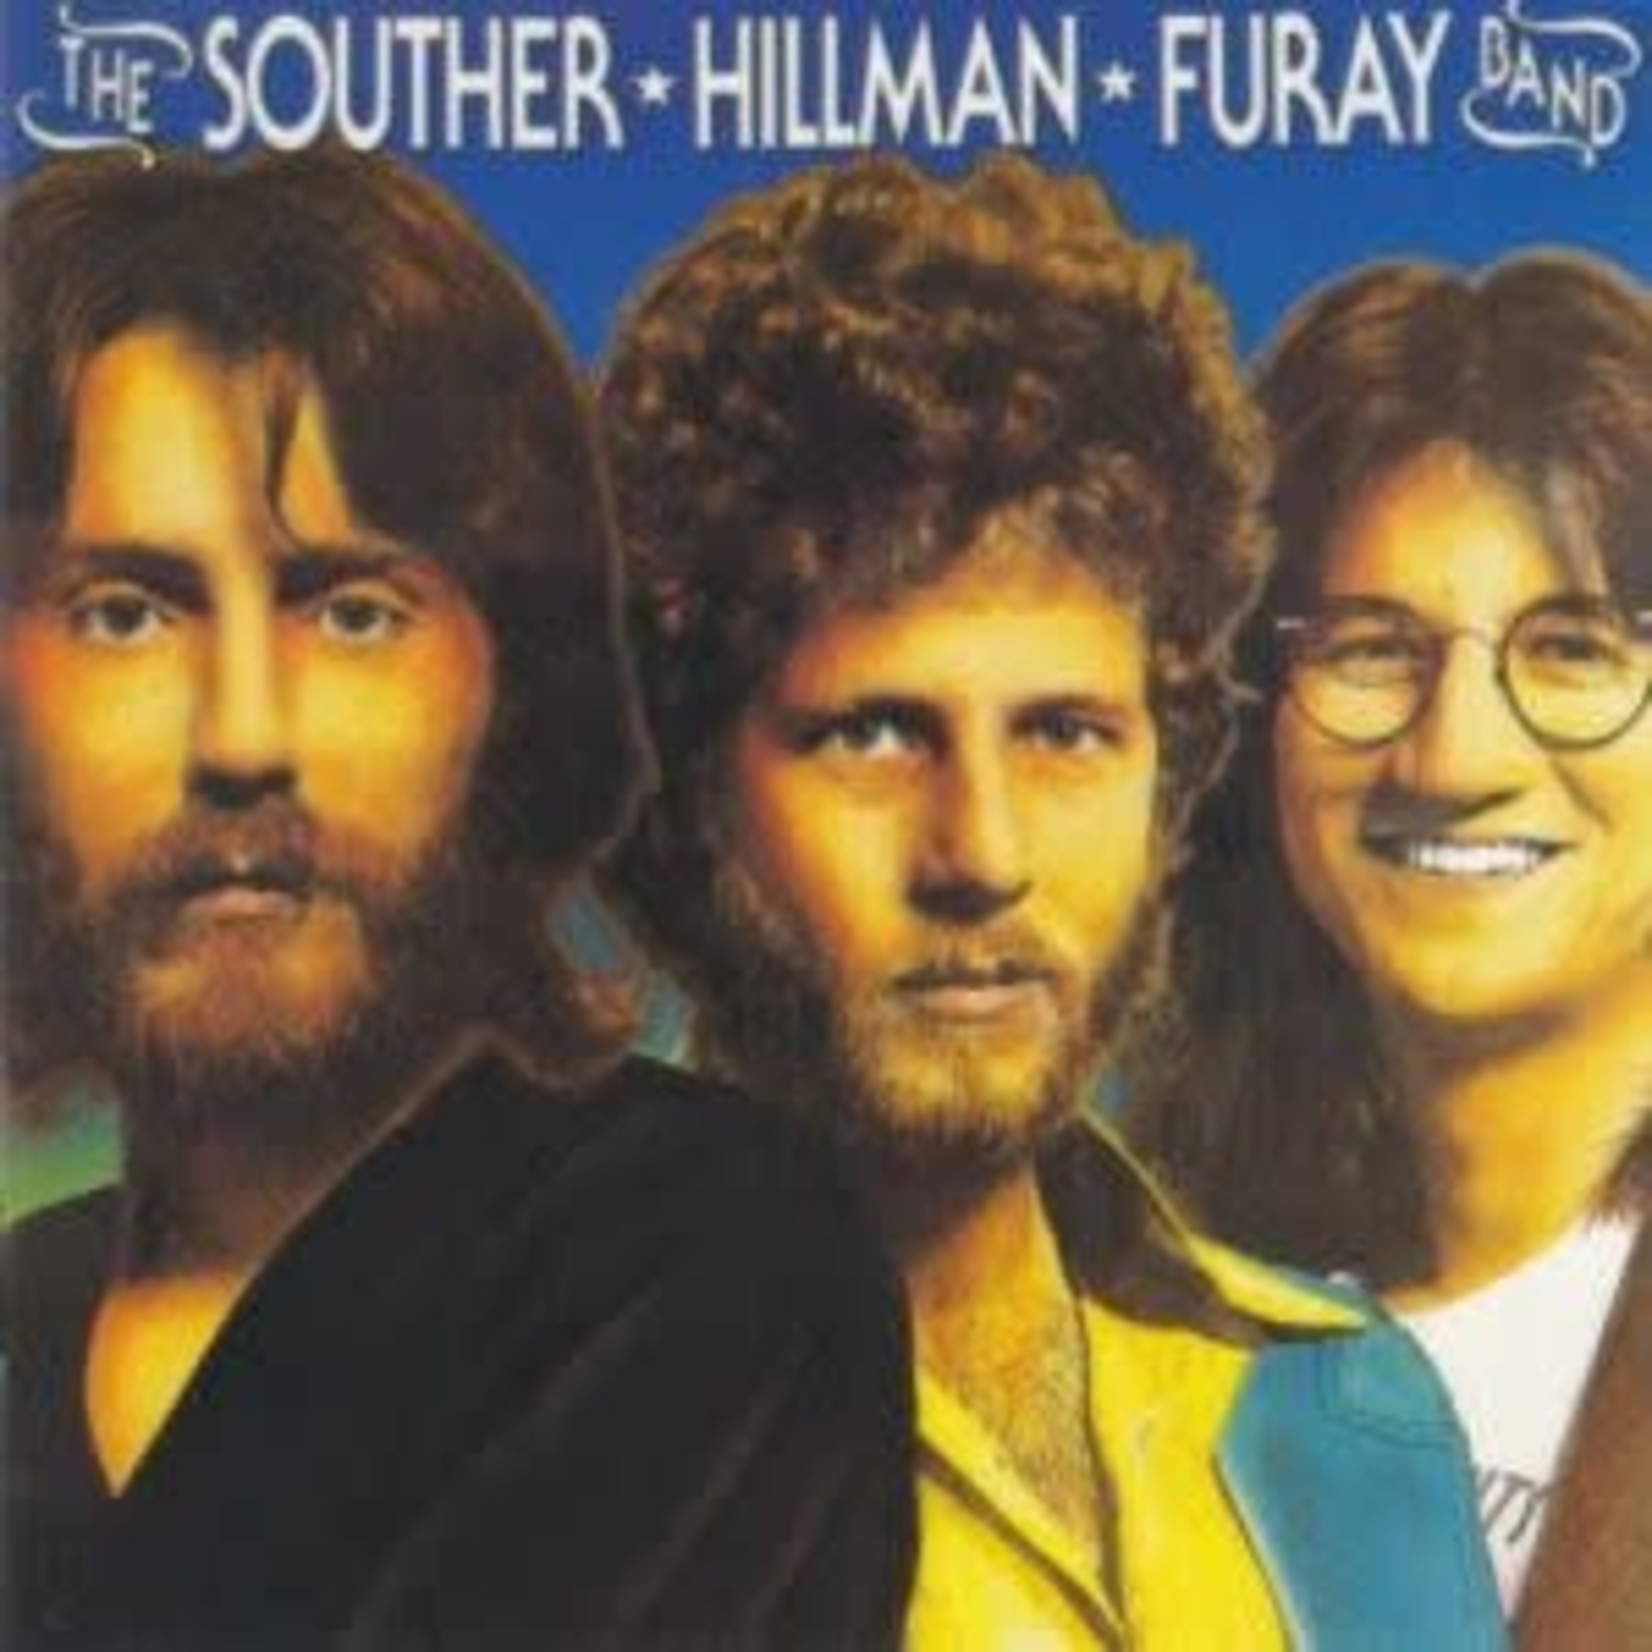 [Vintage] Souther-Hillman-Furay Band - self-titled